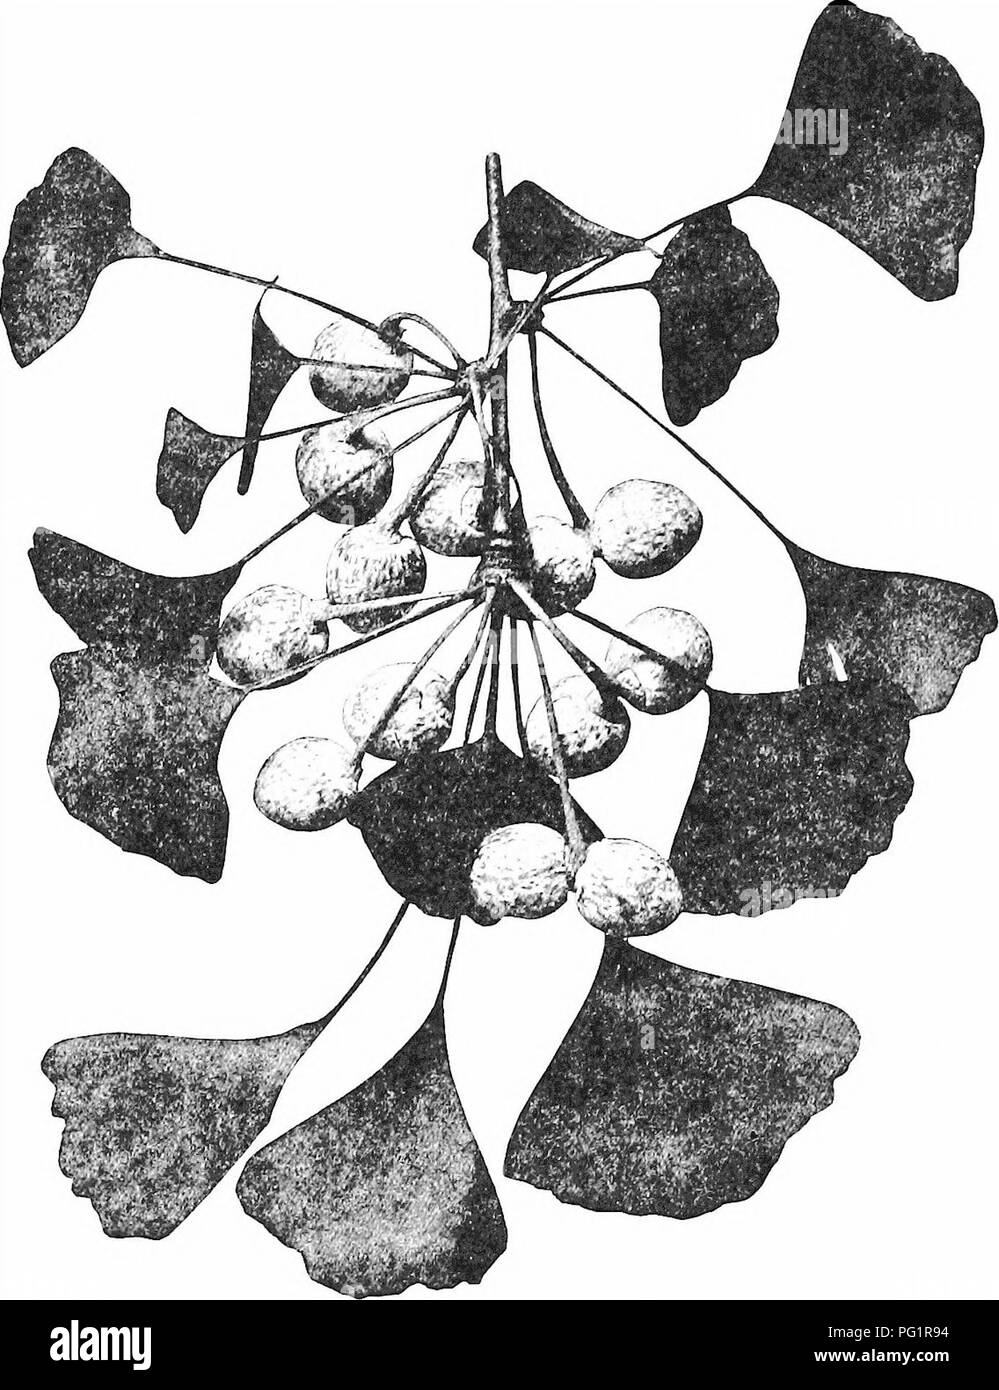 . Morphology of gymnosperms. Gymnosperms; Plant morphology. 196 MORPHOLOGY OF GYMNOSPERMS material, and especially taking into account numerous abnormal cases, came to the conclusion that the stalk is a shoot usually bearing two rudimentary carpels (megasporophylls) which are represented. Fig. 223.—Ginkgo biloba: part of a long branch bearing dwarf branches with ovulate strobih.—After Coulter (54). by the two collars. The abnormal cases may be summed up as foUov/s: ovules on more or less modified foliage leaves; intergrades from nor- mal collars to blades bearing ovules; distinctly stalked ovu Stock Photo